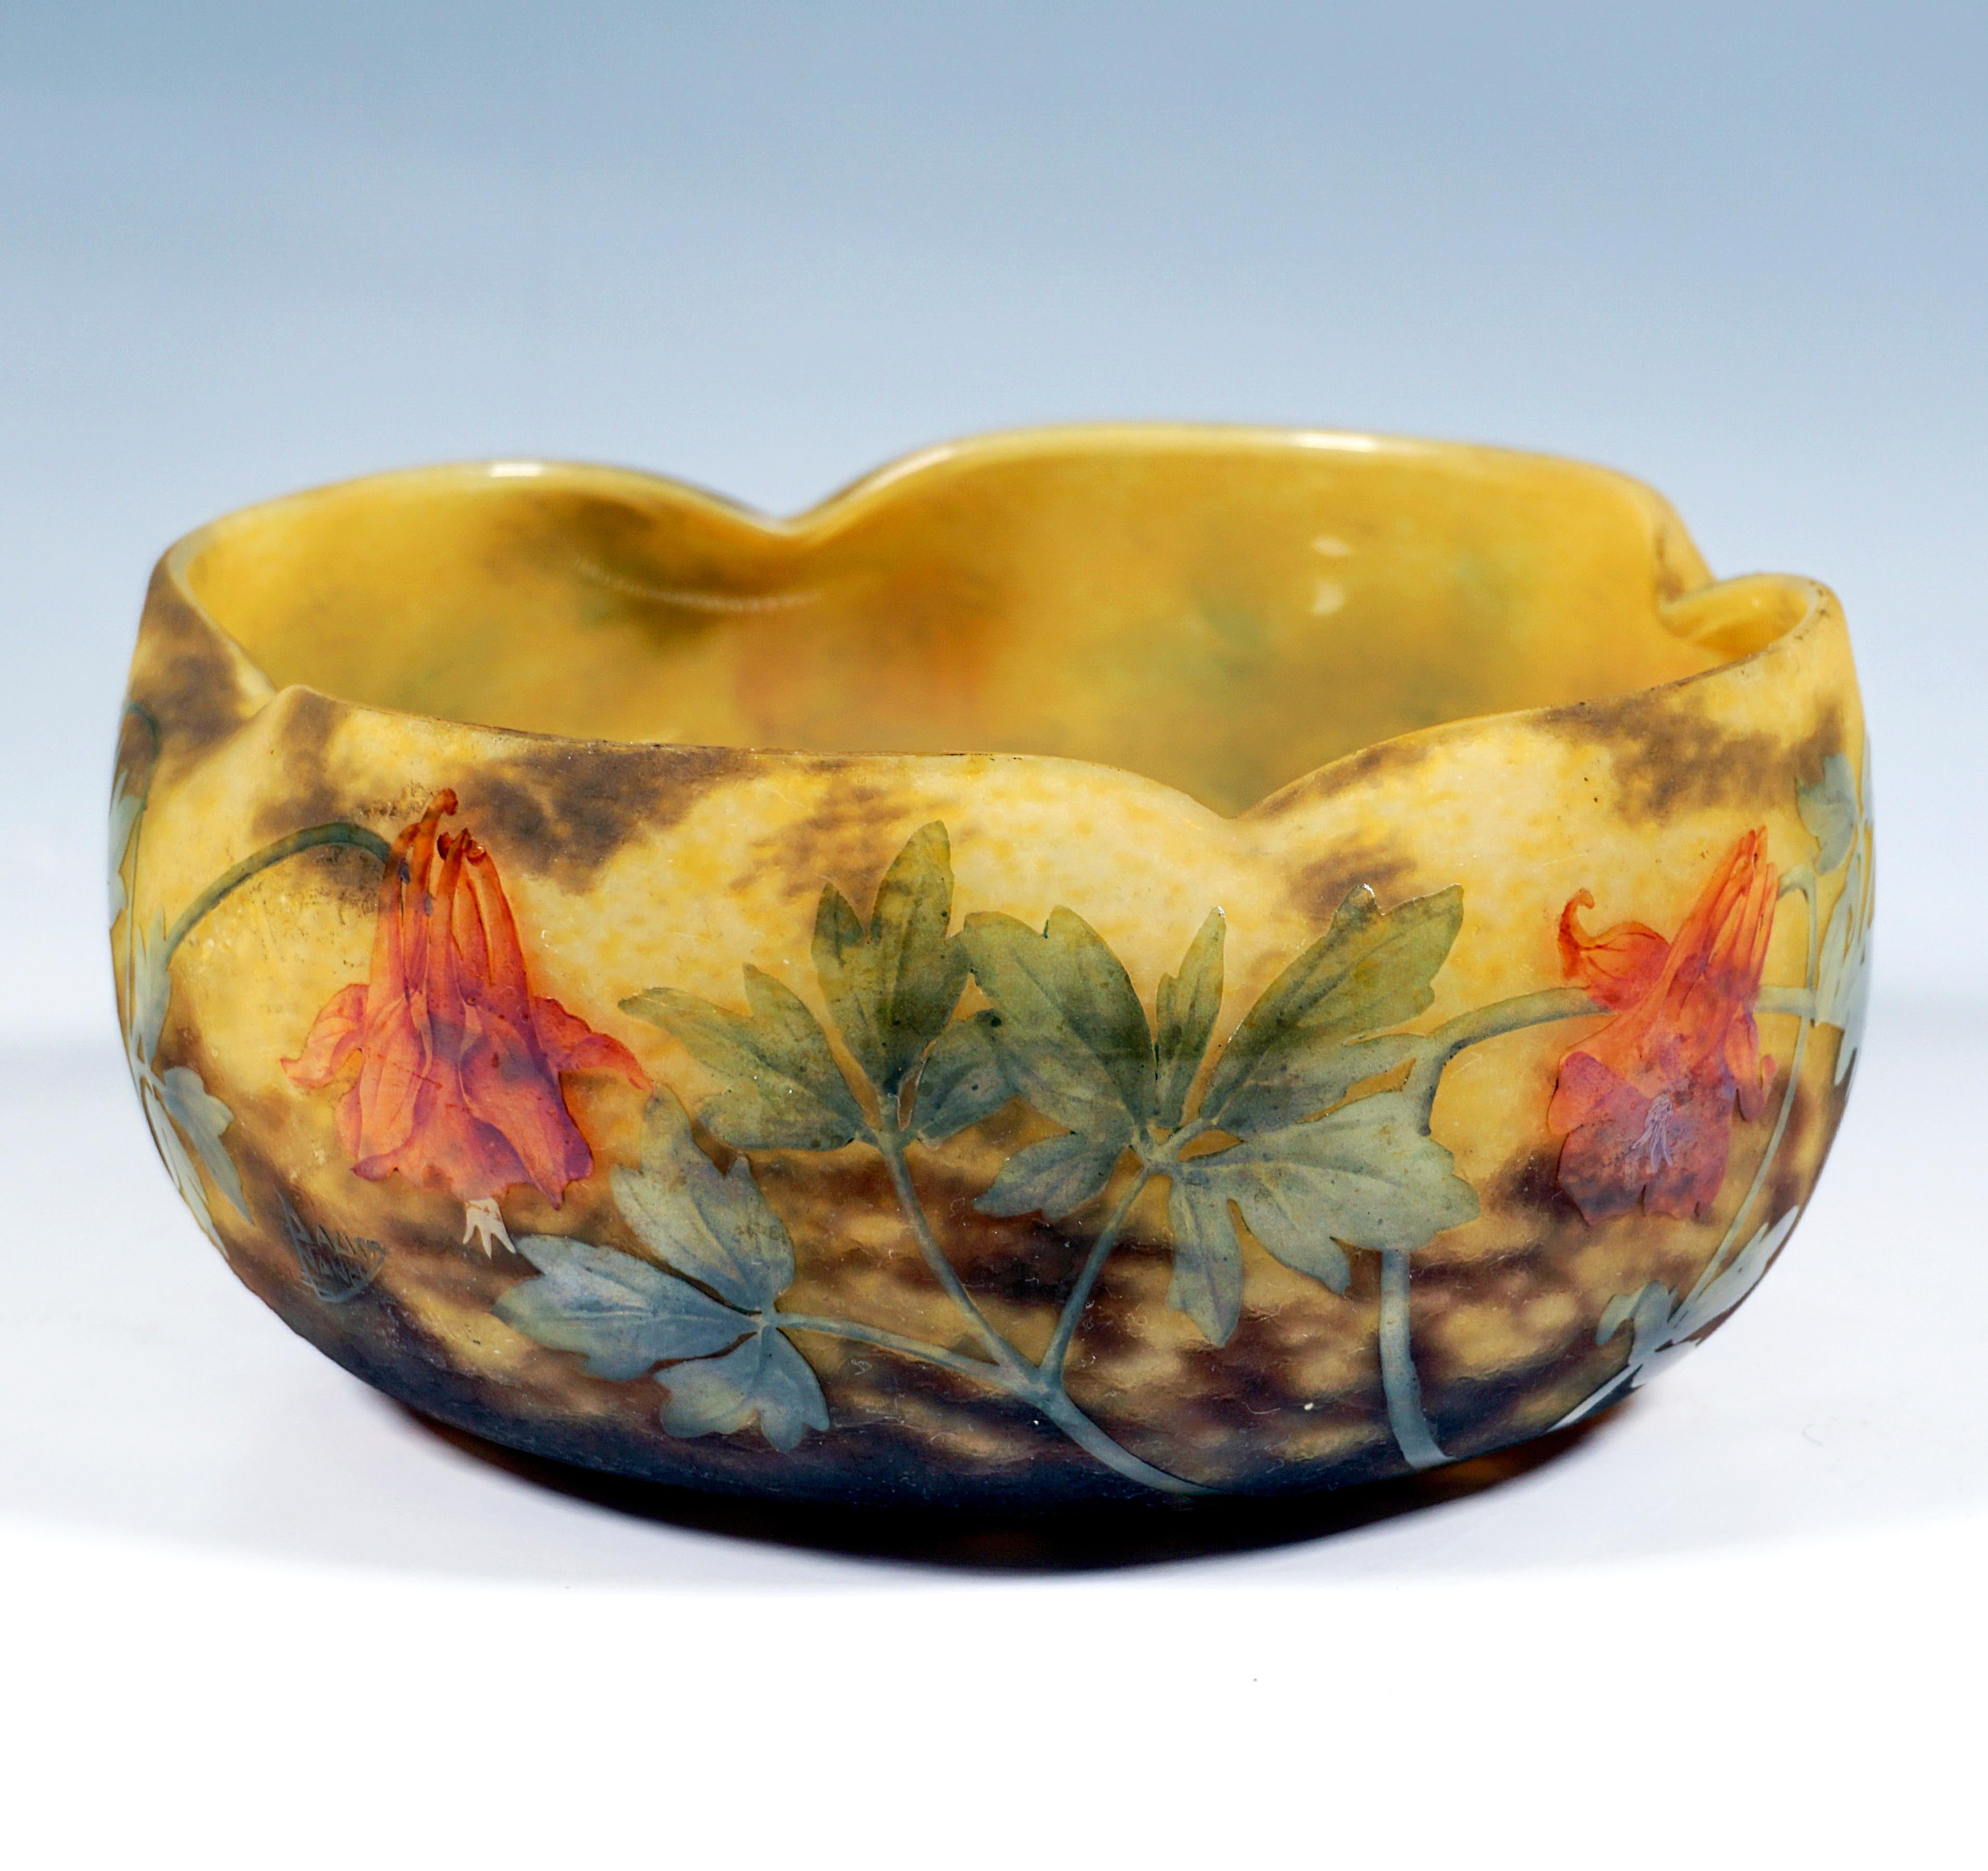 Large round bowl with a quatrefoil-shaped indented mouth rim, colorless glass with yellow and brown powder inclusions, etched and painted with colored enamel columbine decor, satin-finished and structured surface in the background, inside and